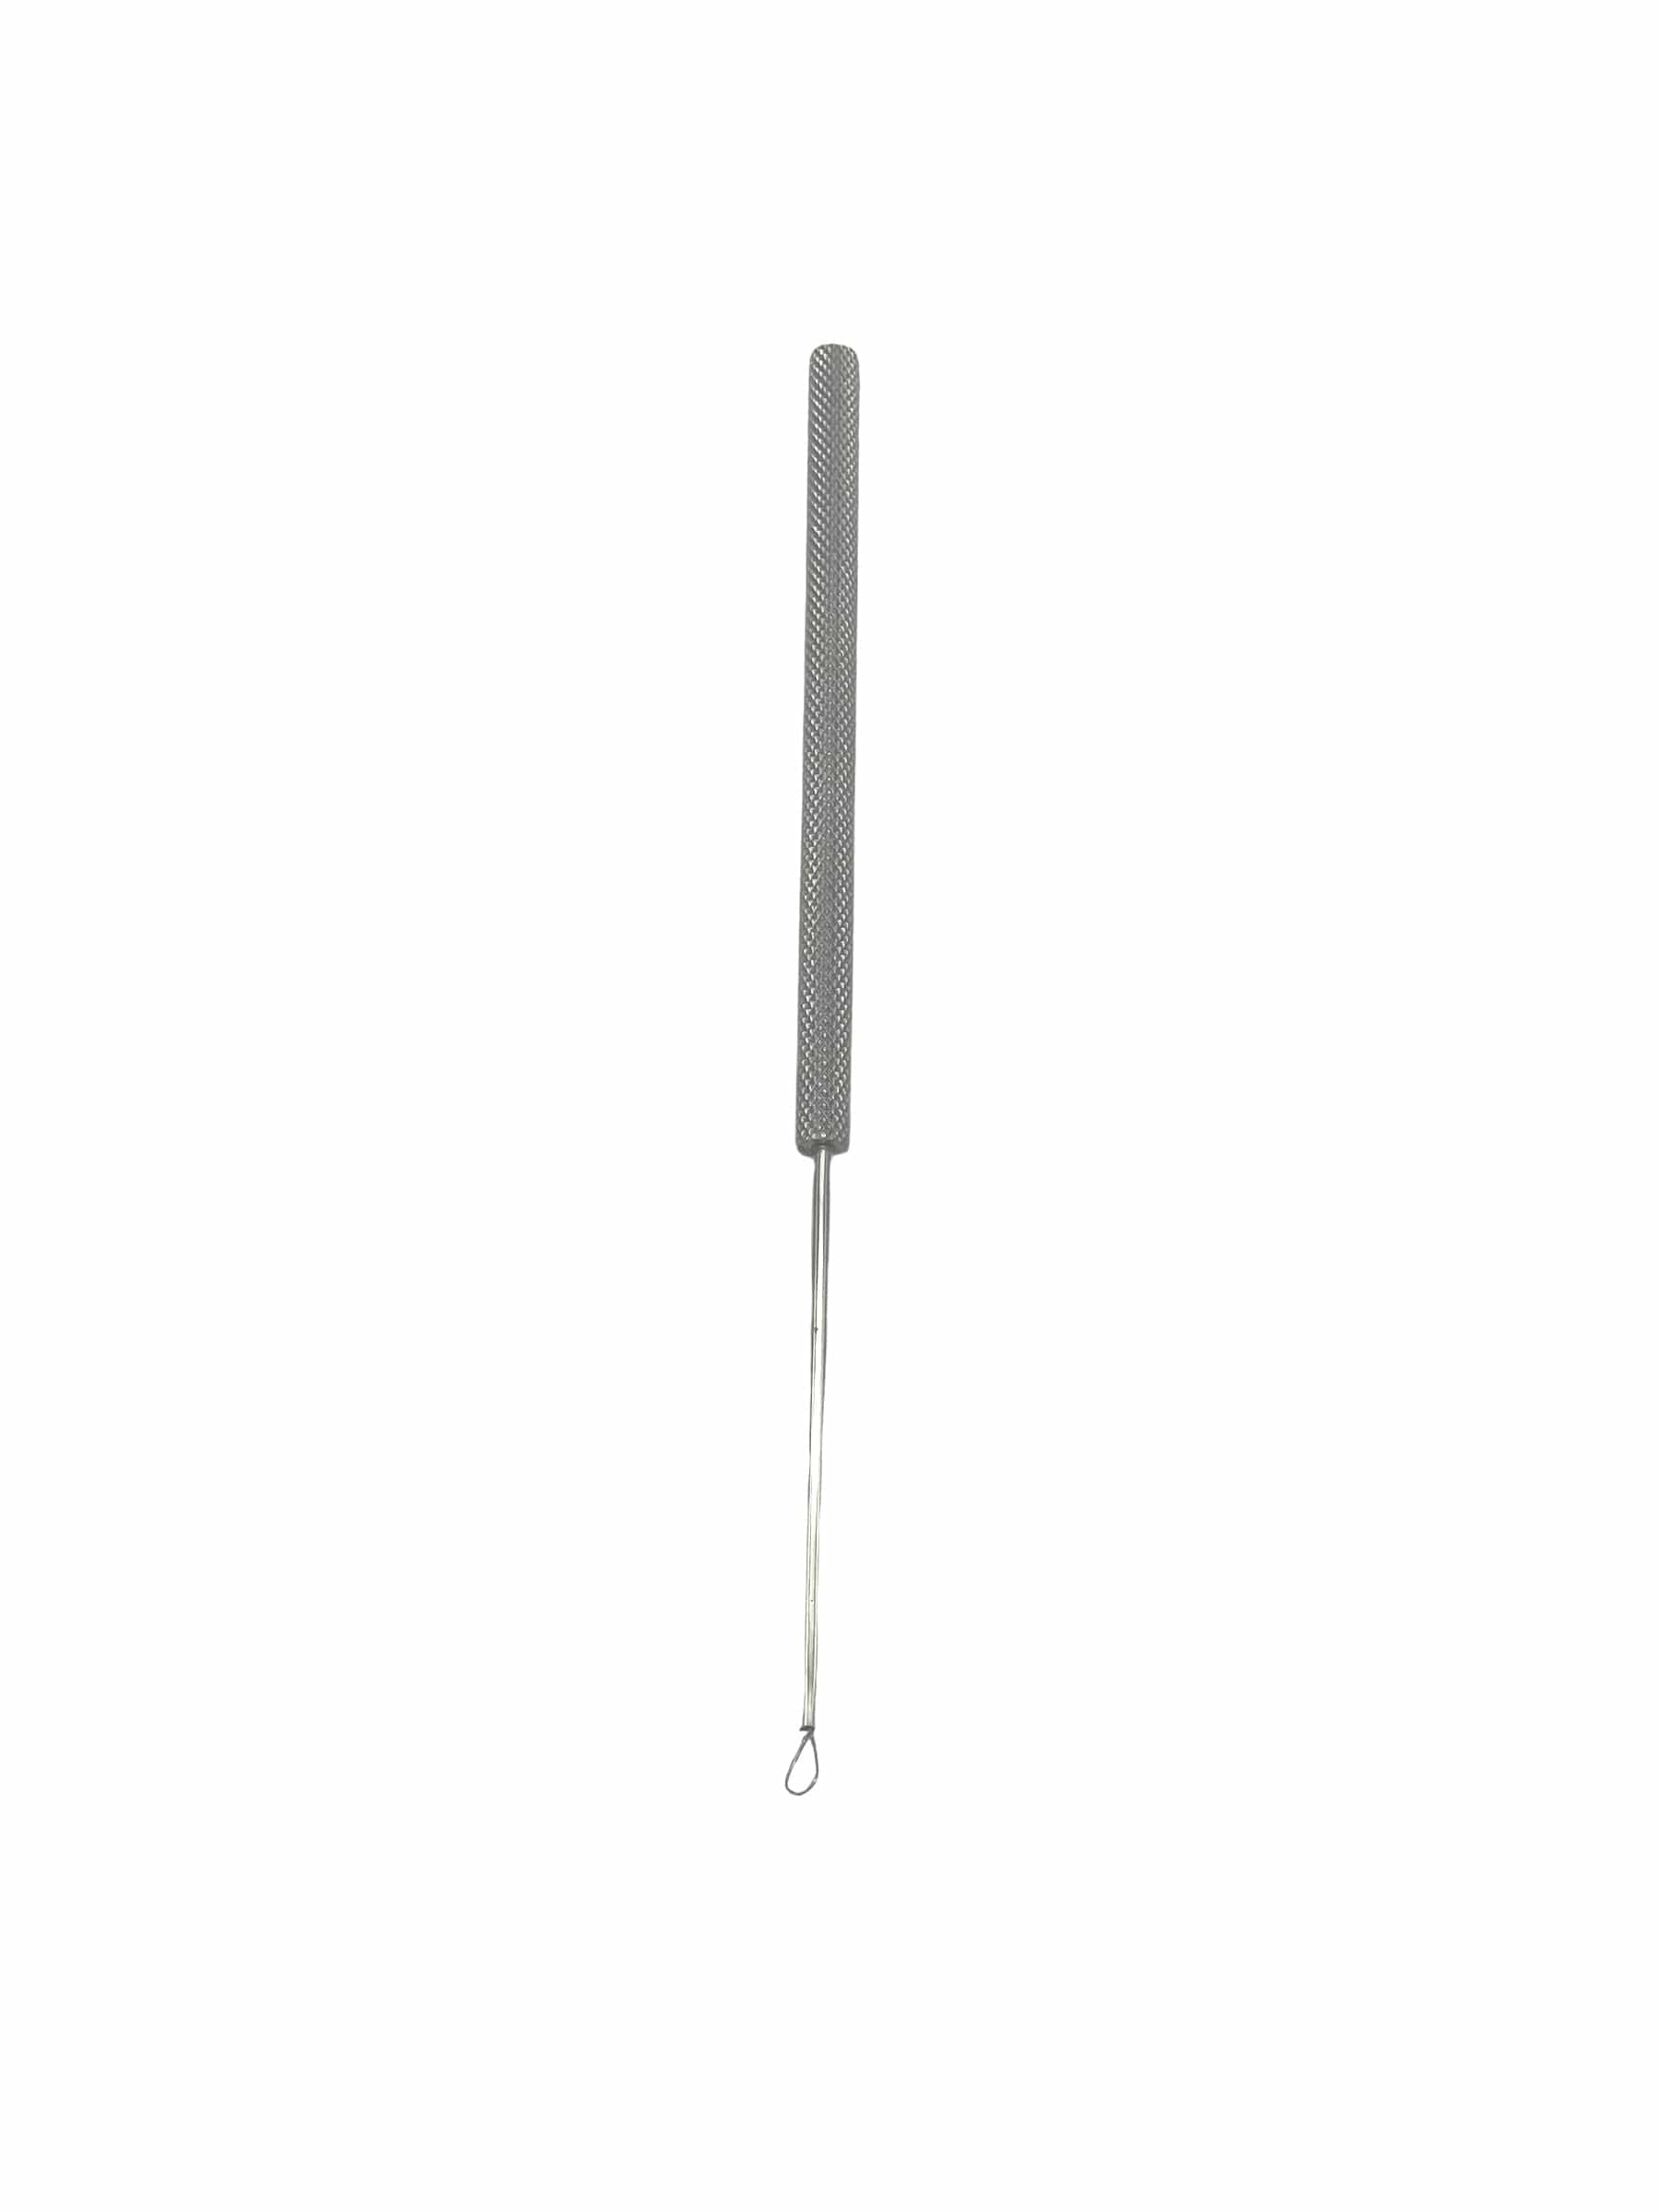 Comedone & Blackheads Extractor Stainless Steel 6” Skin Care Tools